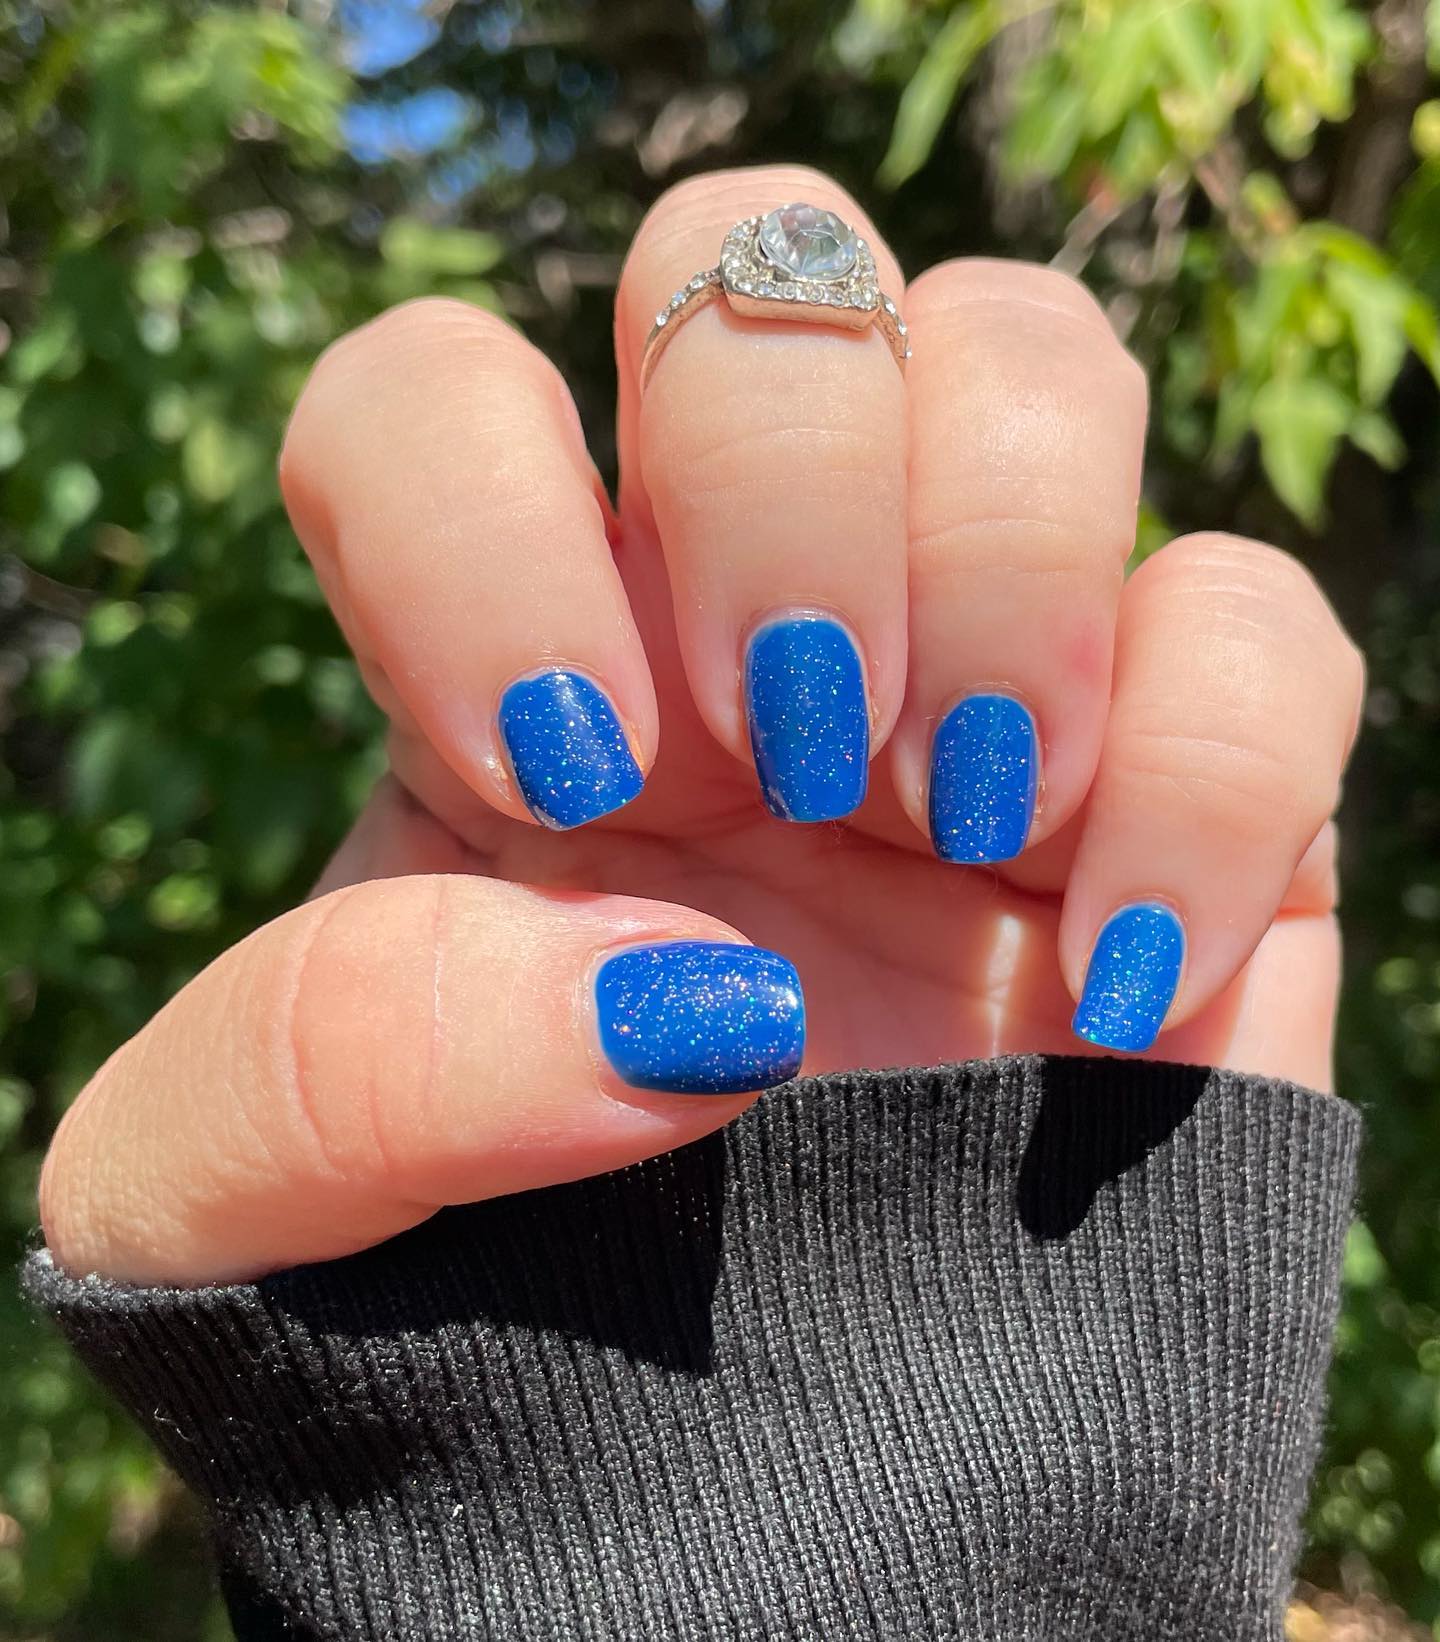 Dark blue is enough to show off your nails to everybody. Are you ready to shine with some glitters on it?